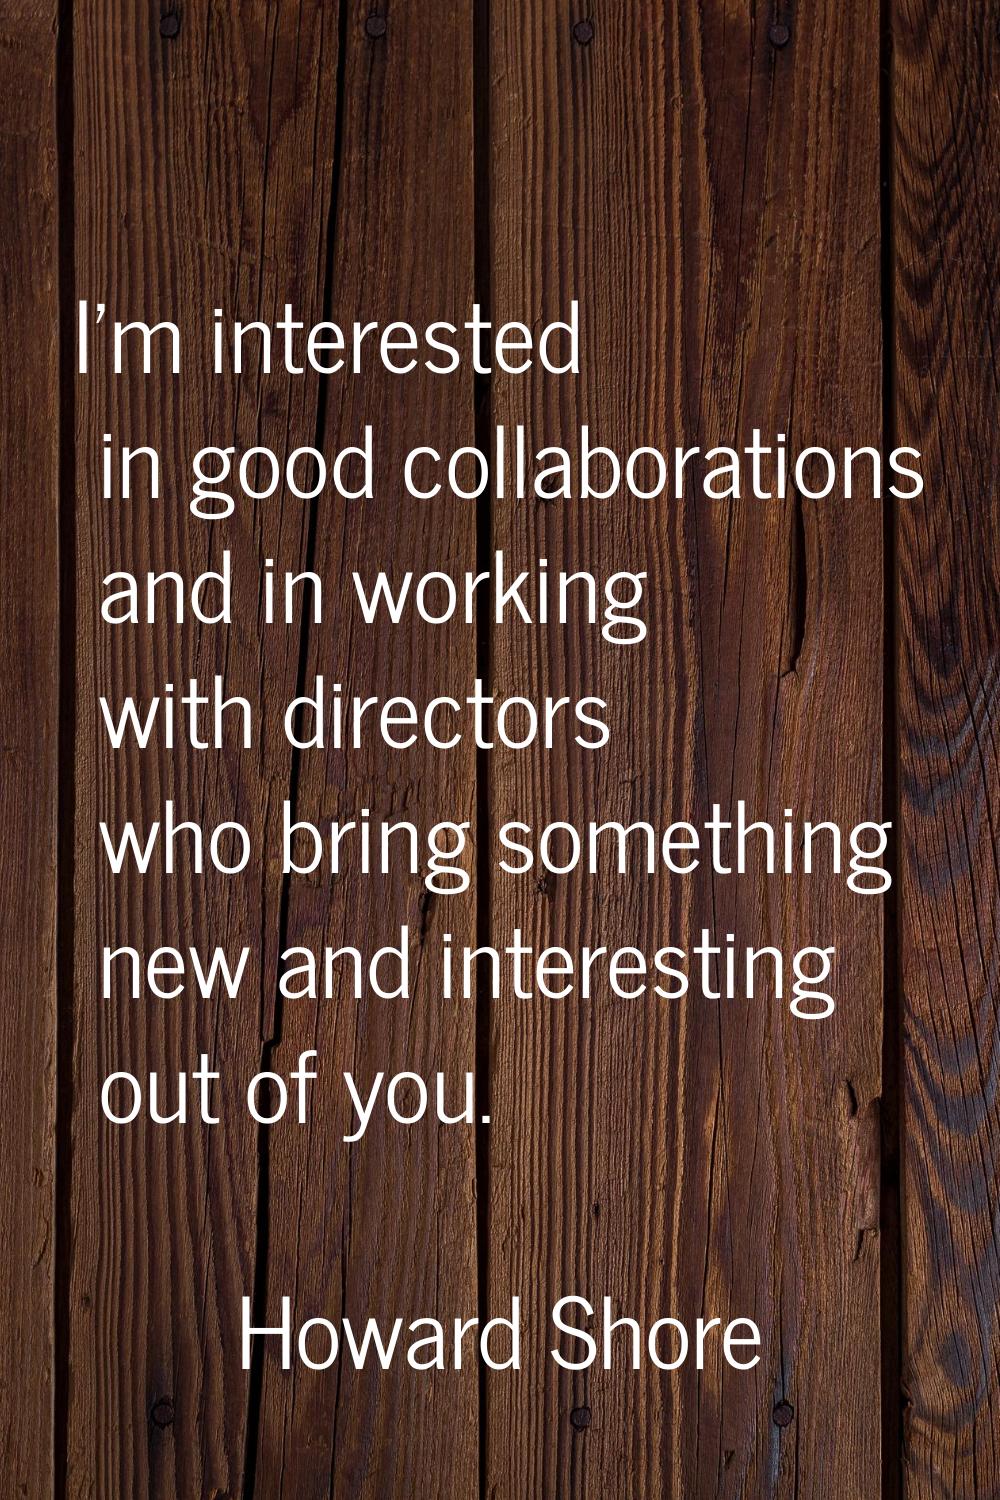 I'm interested in good collaborations and in working with directors who bring something new and int